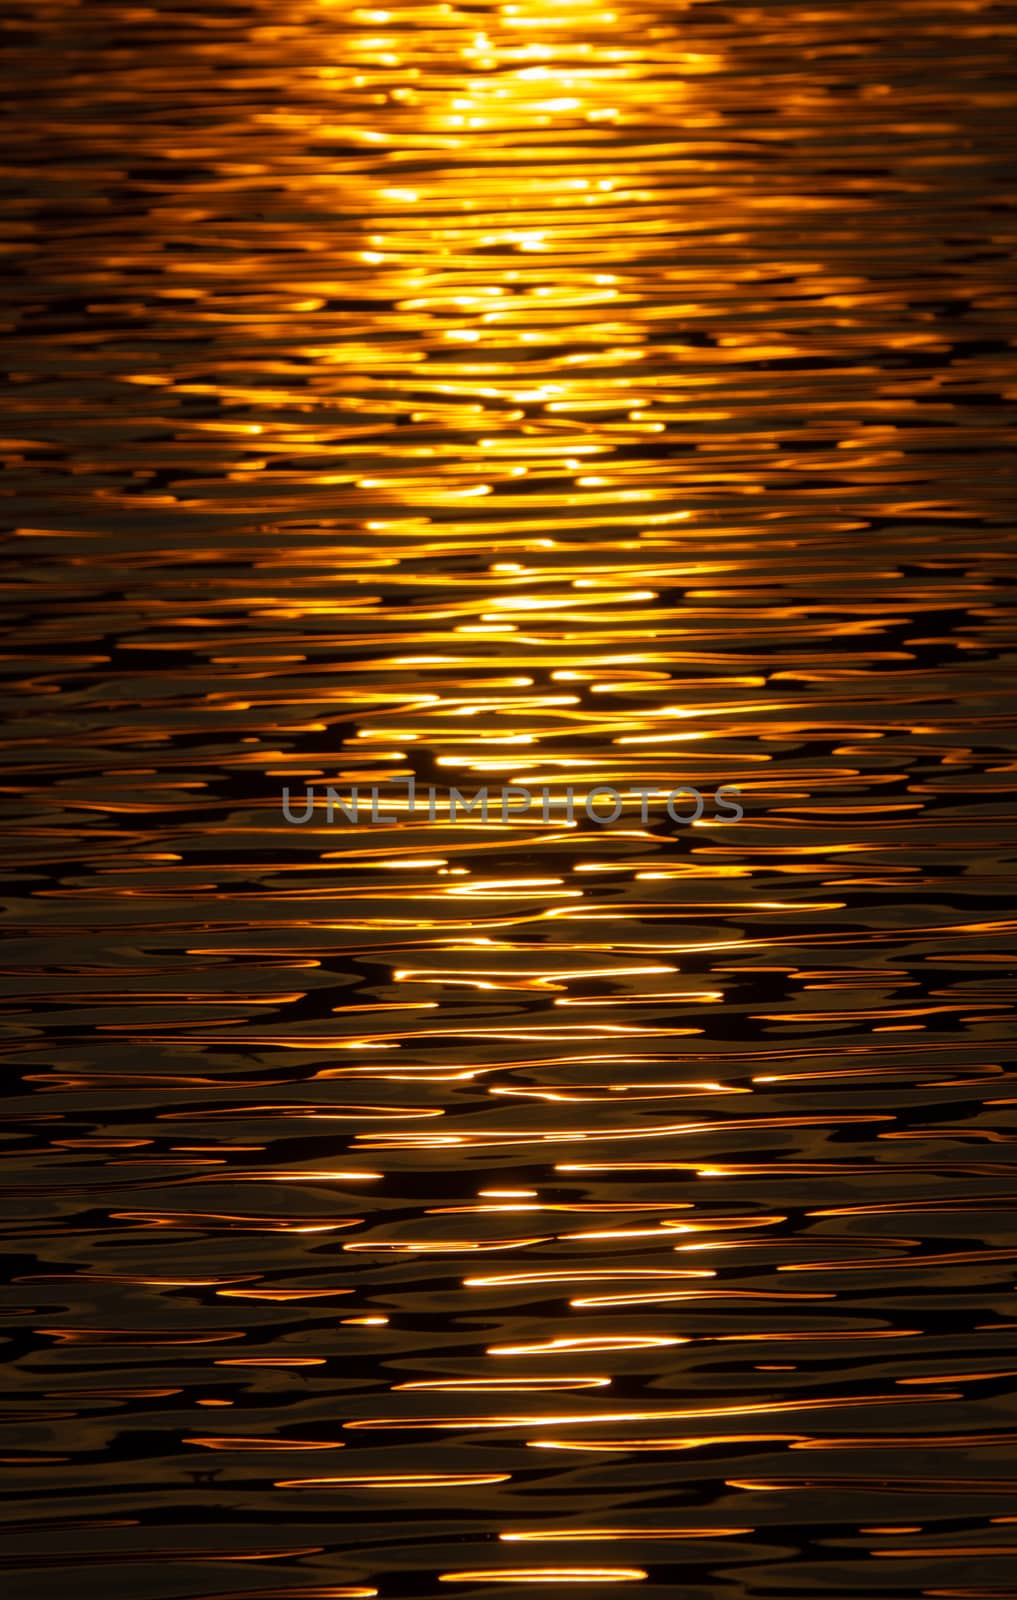 Golden Reflected Sunlight Abstract by mrdoomits